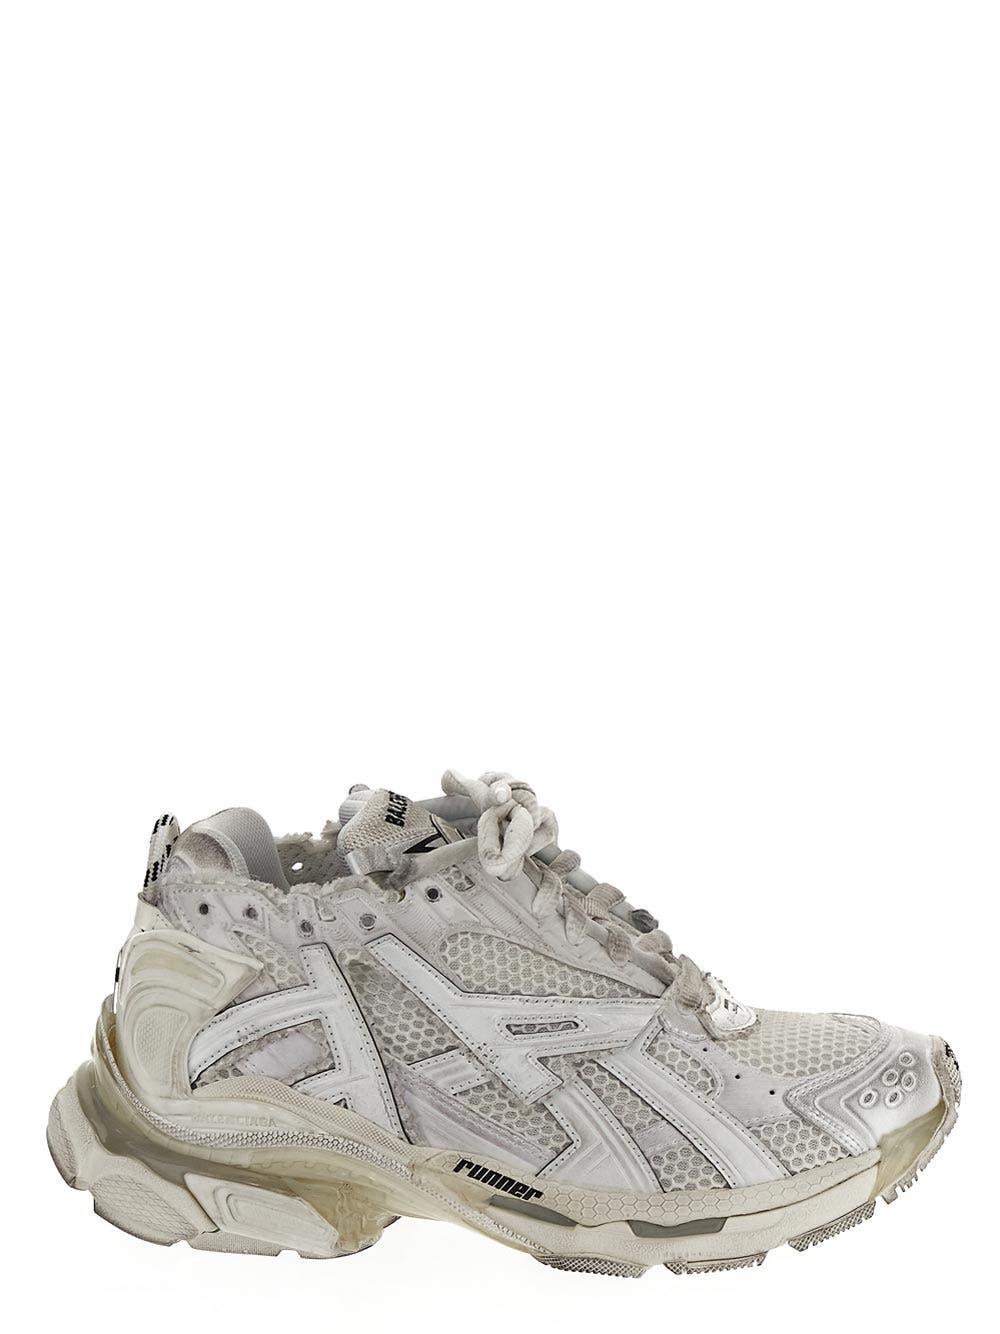 Balenciaga Runner Sneakers in White | Lyst